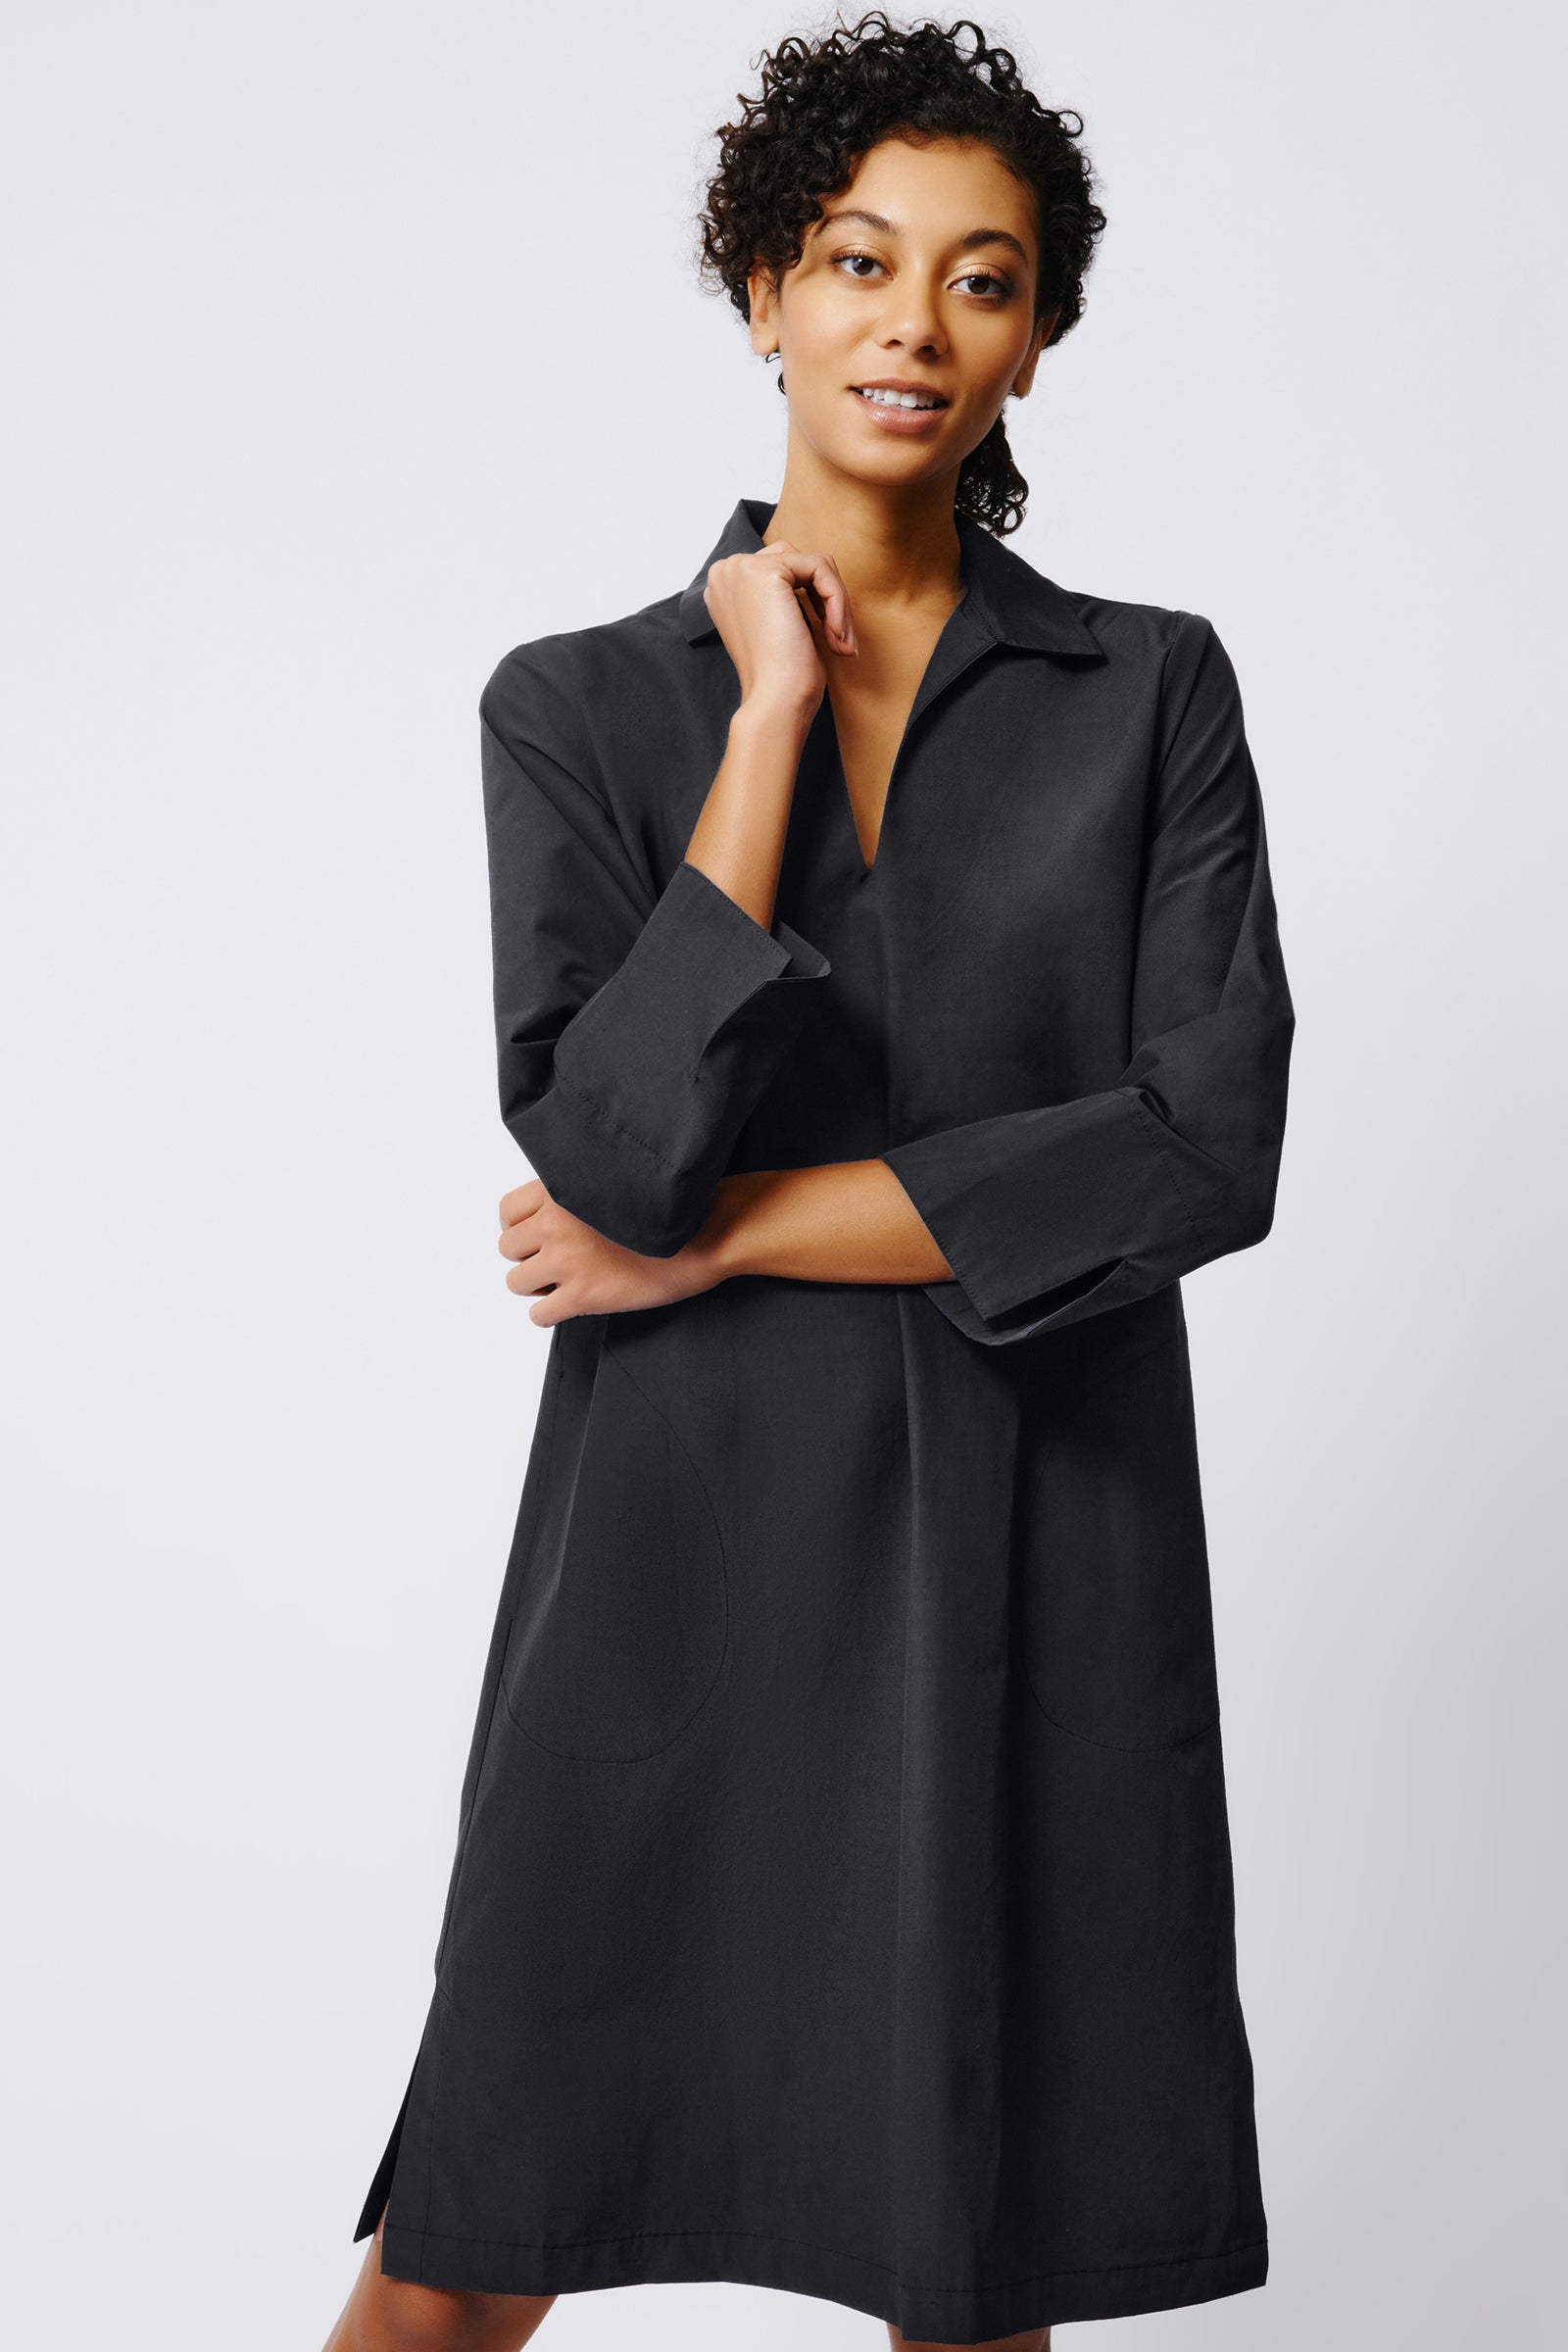 Kal Rieman Collared V Neck Dress in Black Broadcloth on Model Front View Crop 3